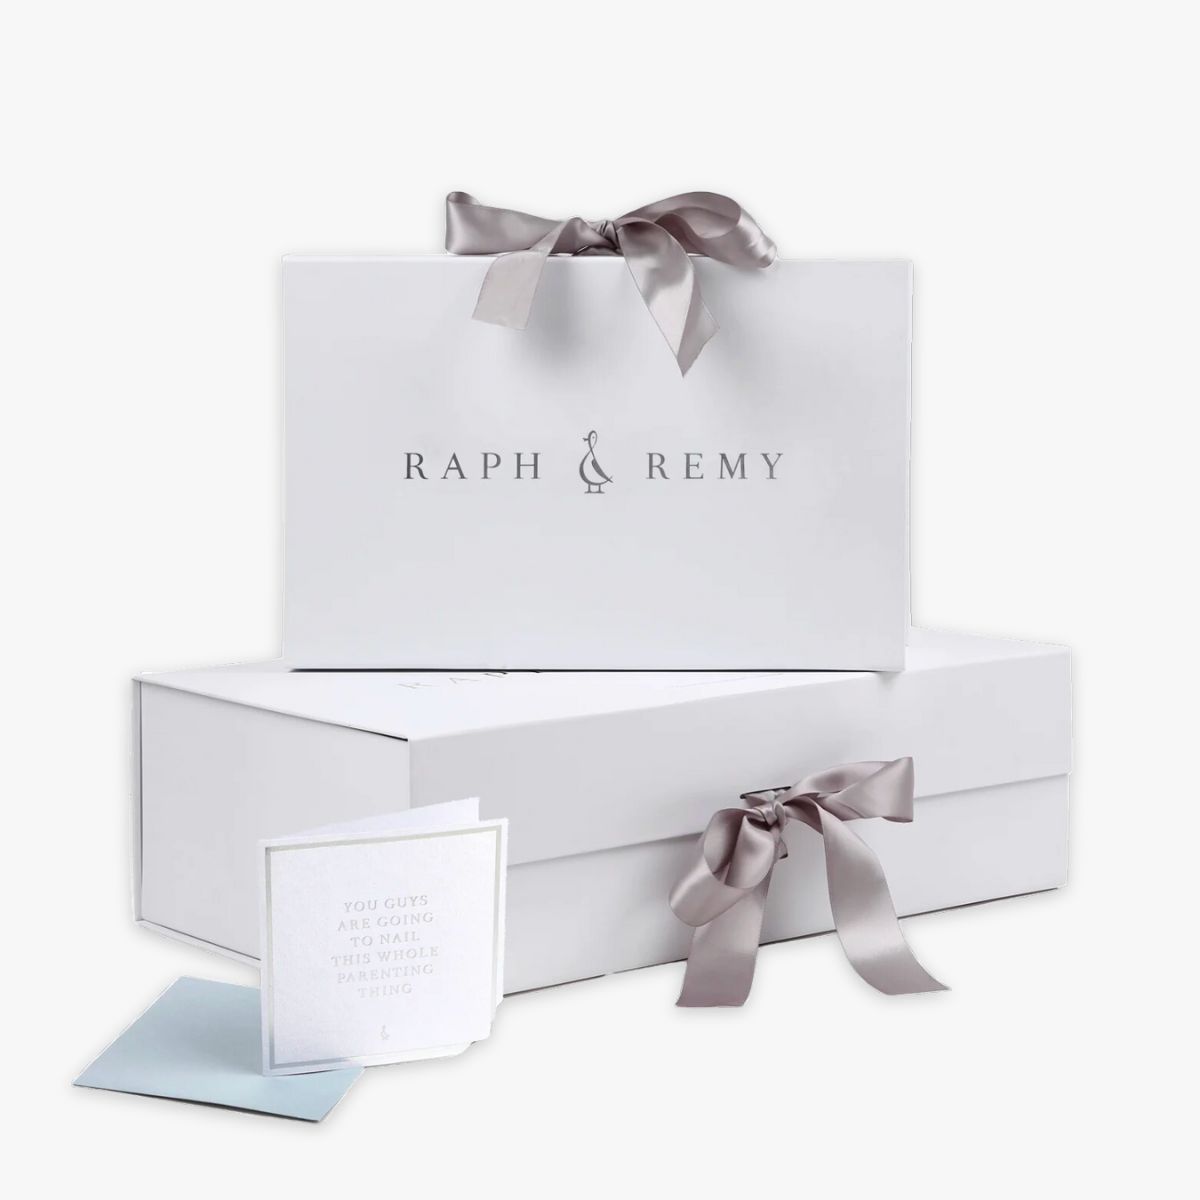 Raph&Remy Packaging